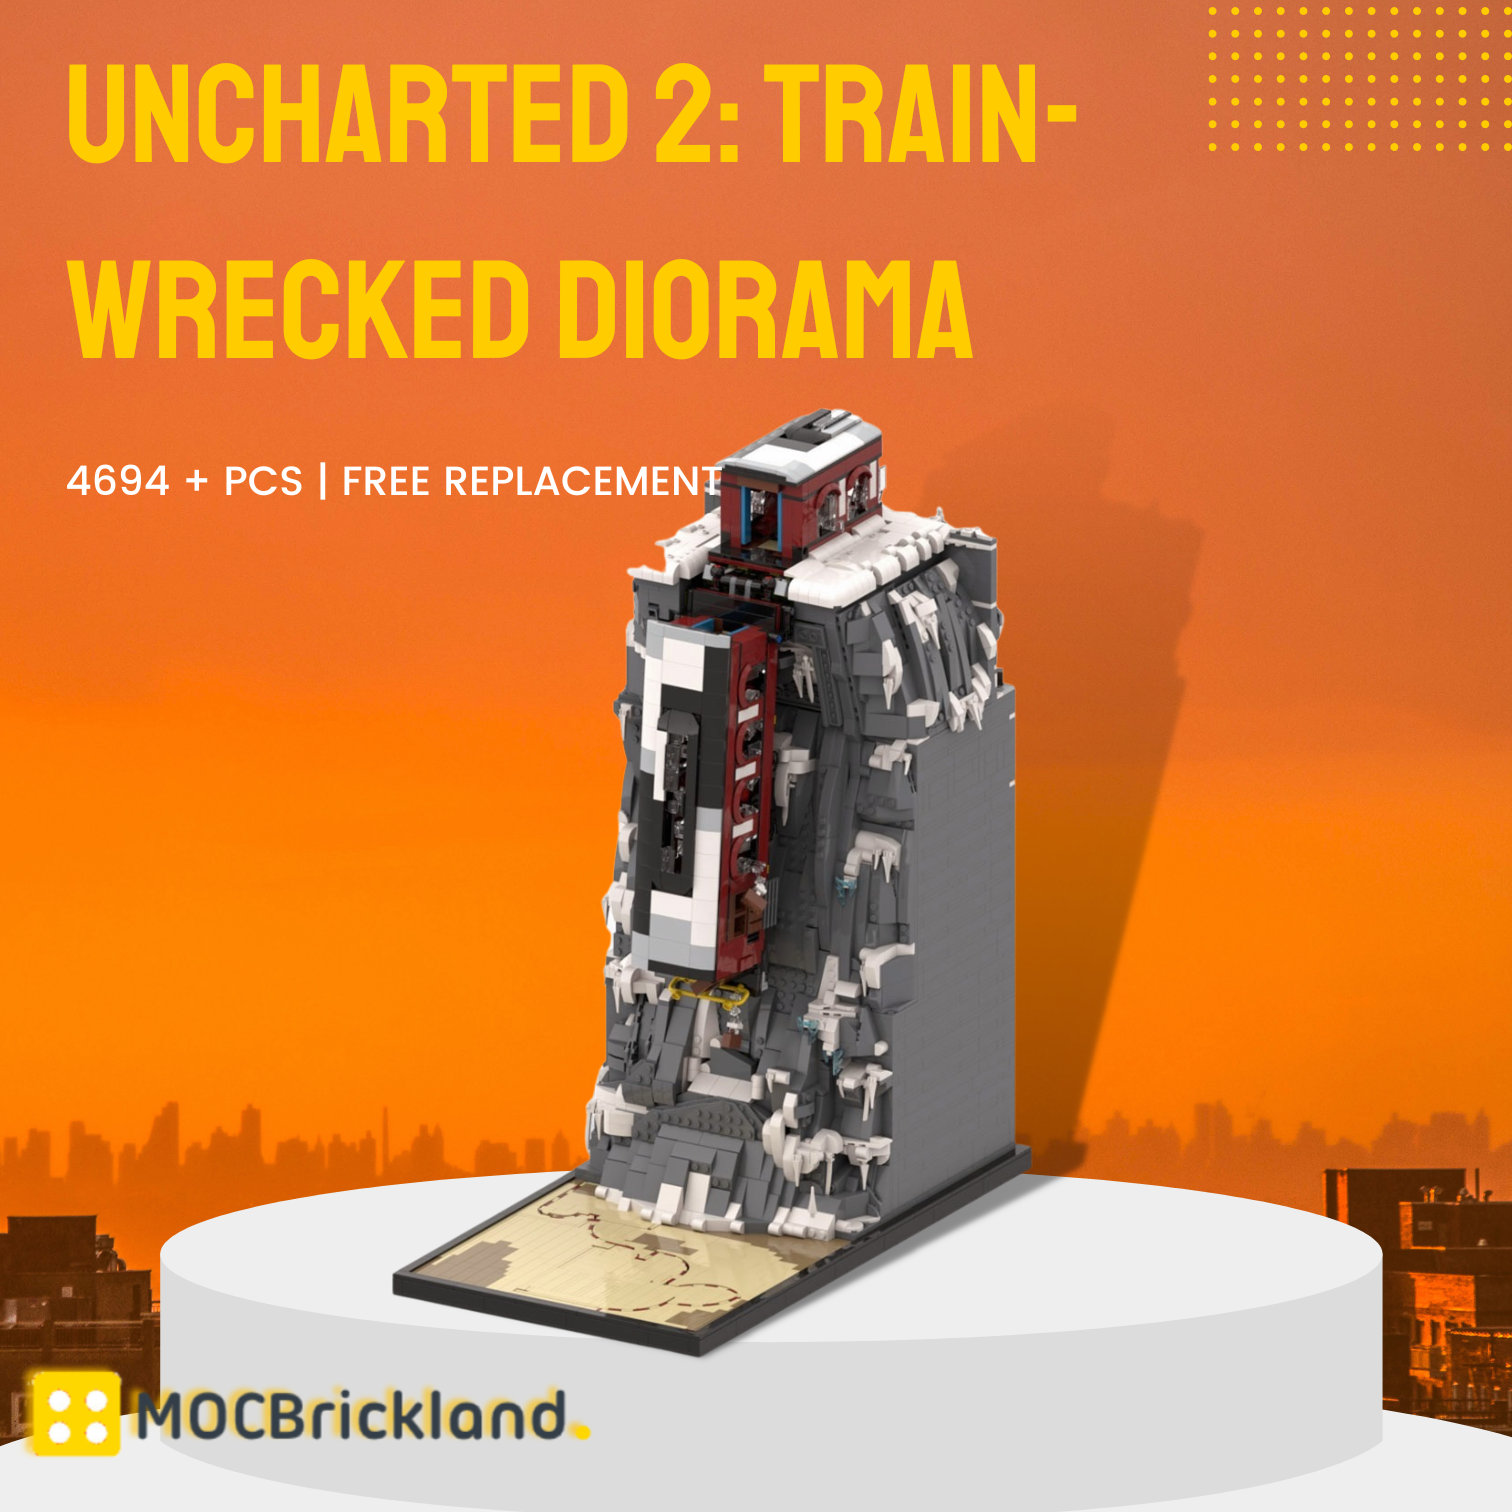 Uncharted 2 Train Wrecked Diorama Moc 125839